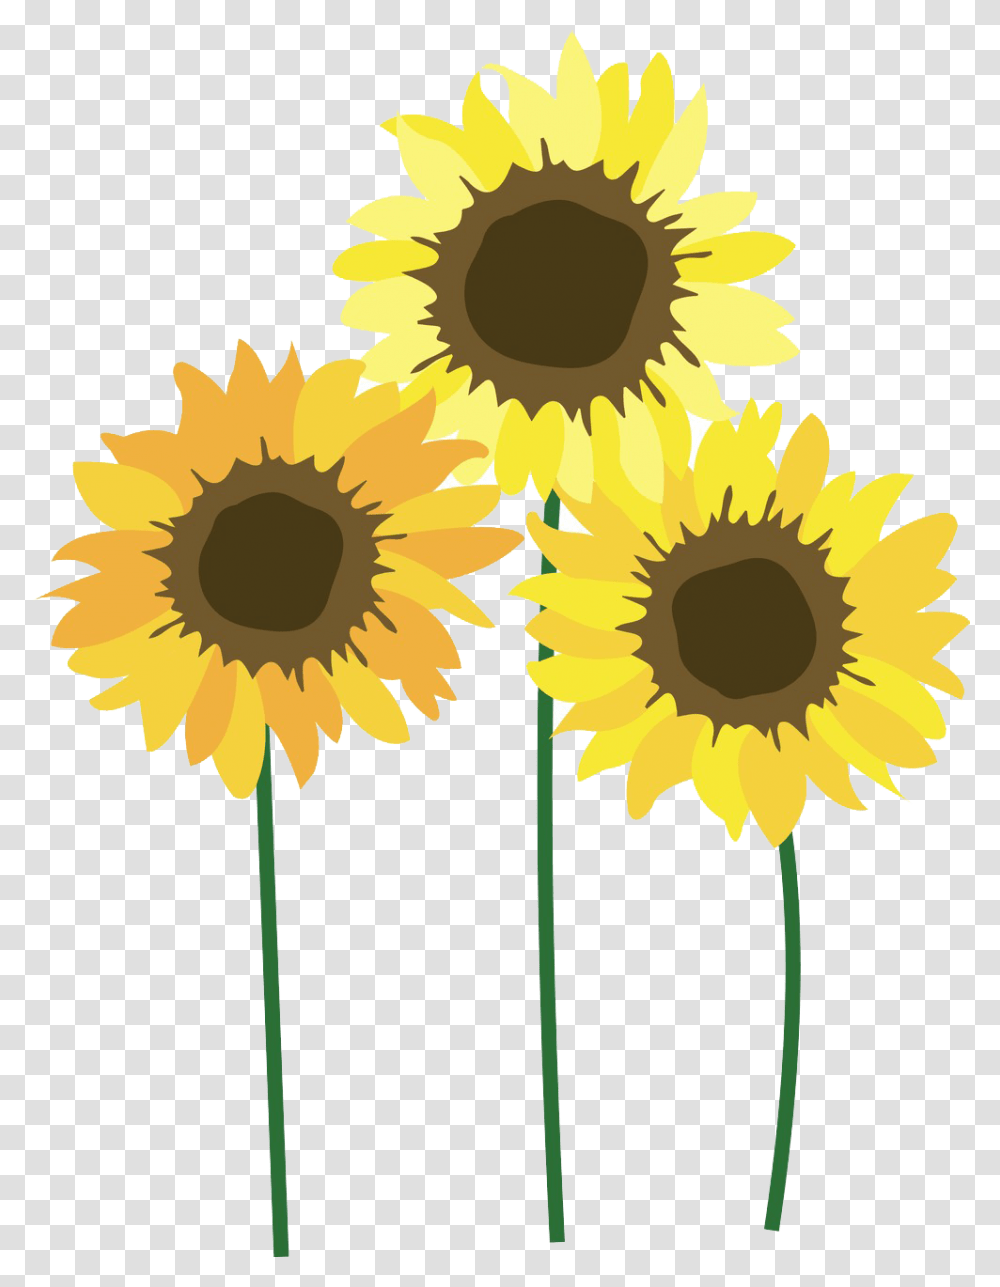 Sunflower Image Download Sunflower Field Clipart, Plant, Blossom, Daisy, Daisies Transparent Png